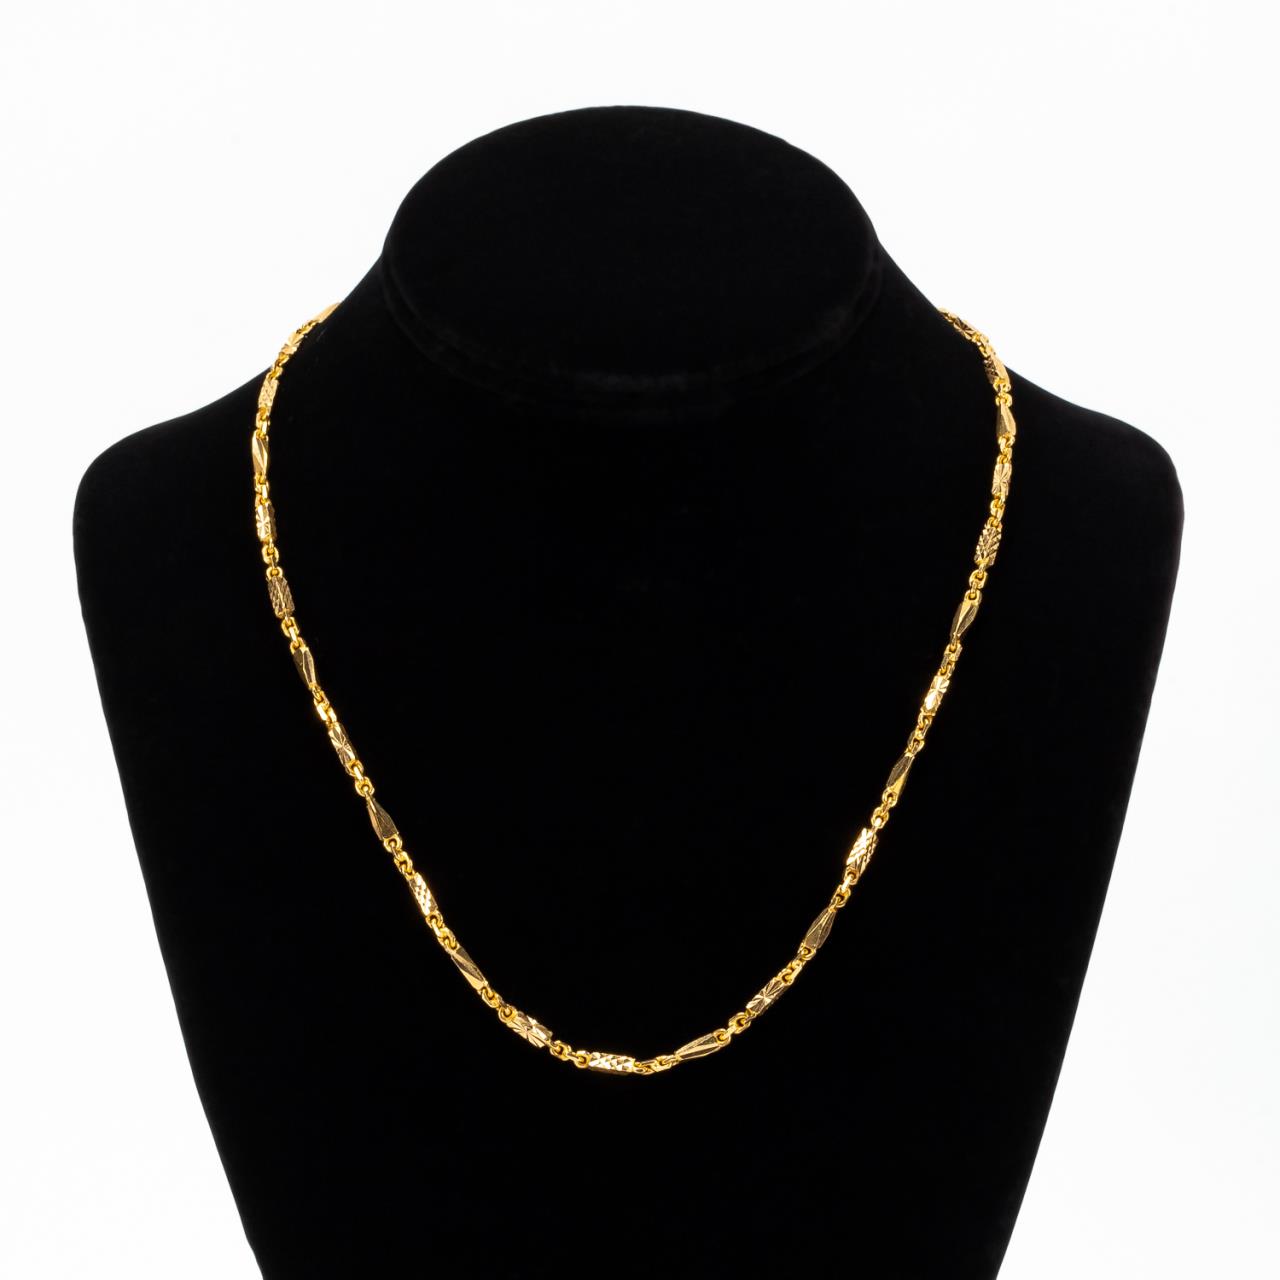 18K YELLOW GOLD 19 LINK BAR CHAIN  35ad13